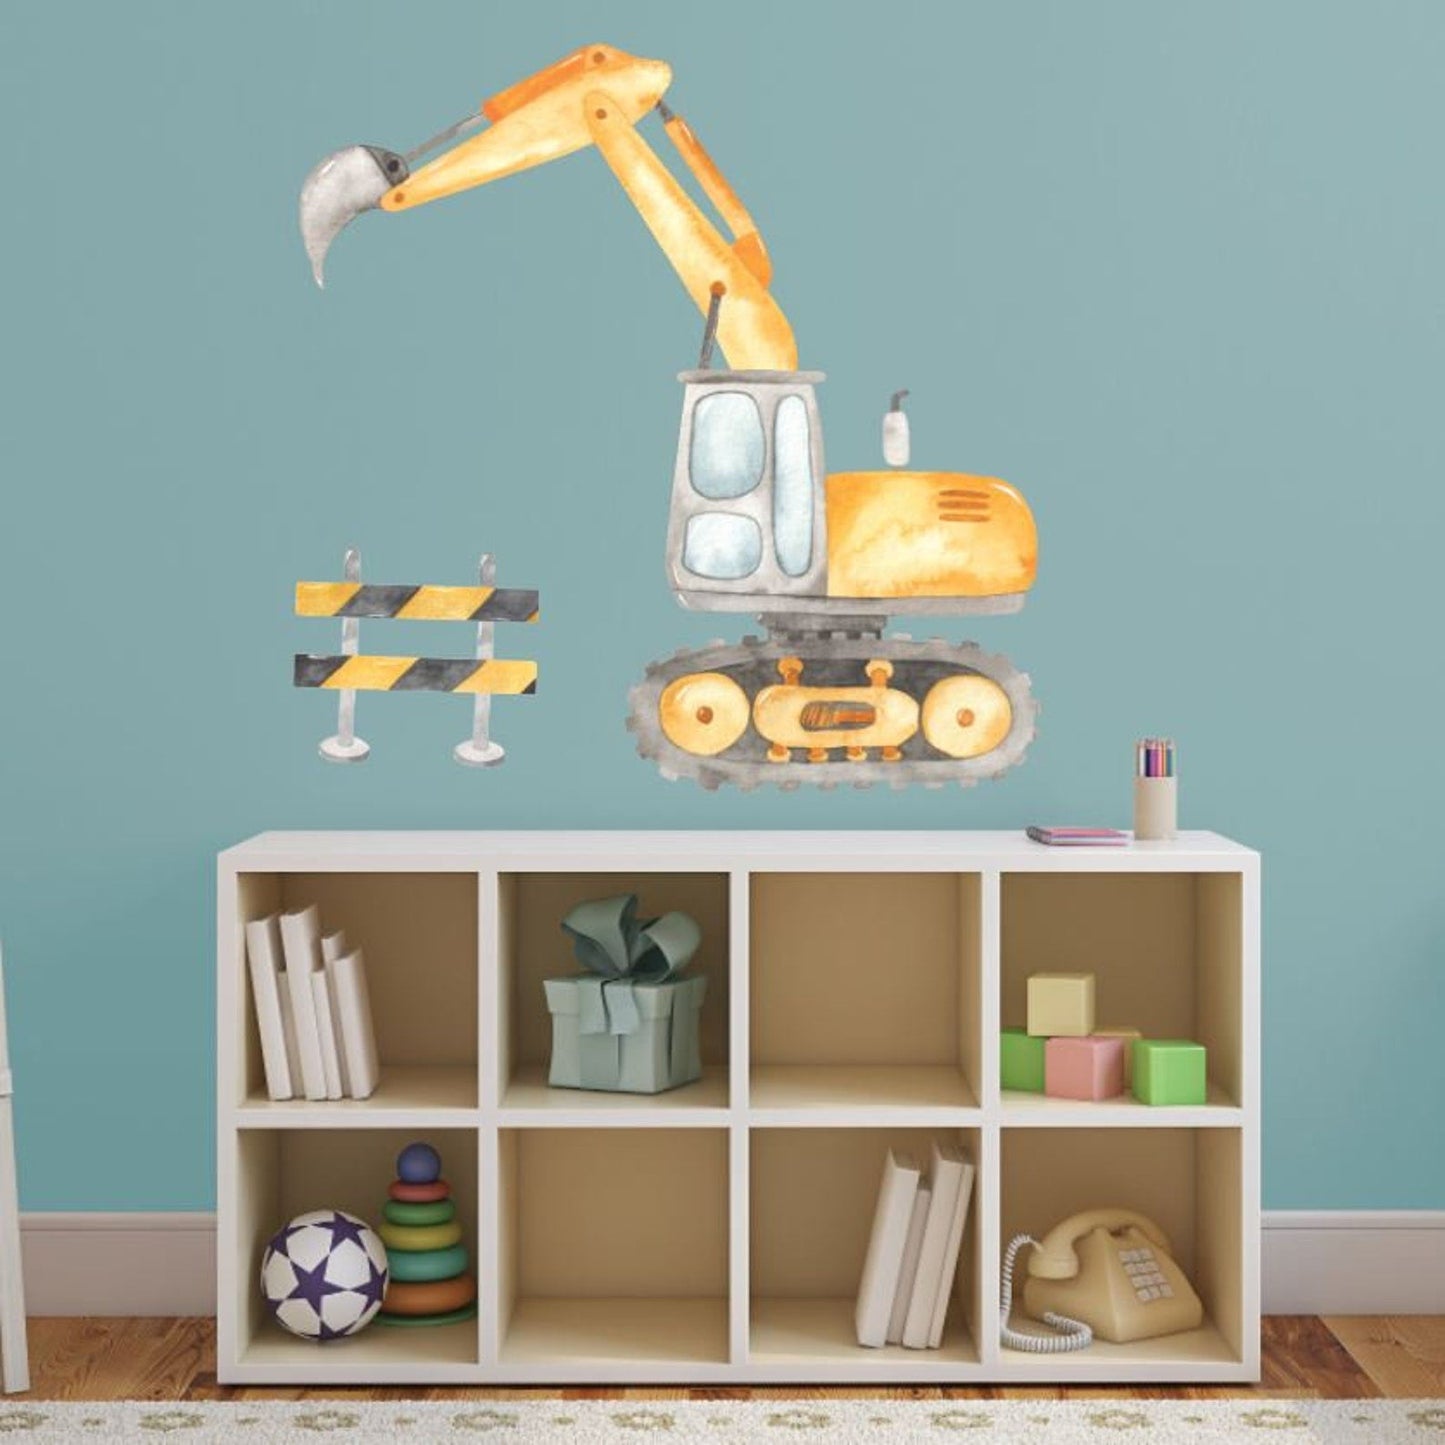 Construction Wall Decals | Bulldozer & Dump Truck | Excavator | Yellow - Picture Perfect Decals